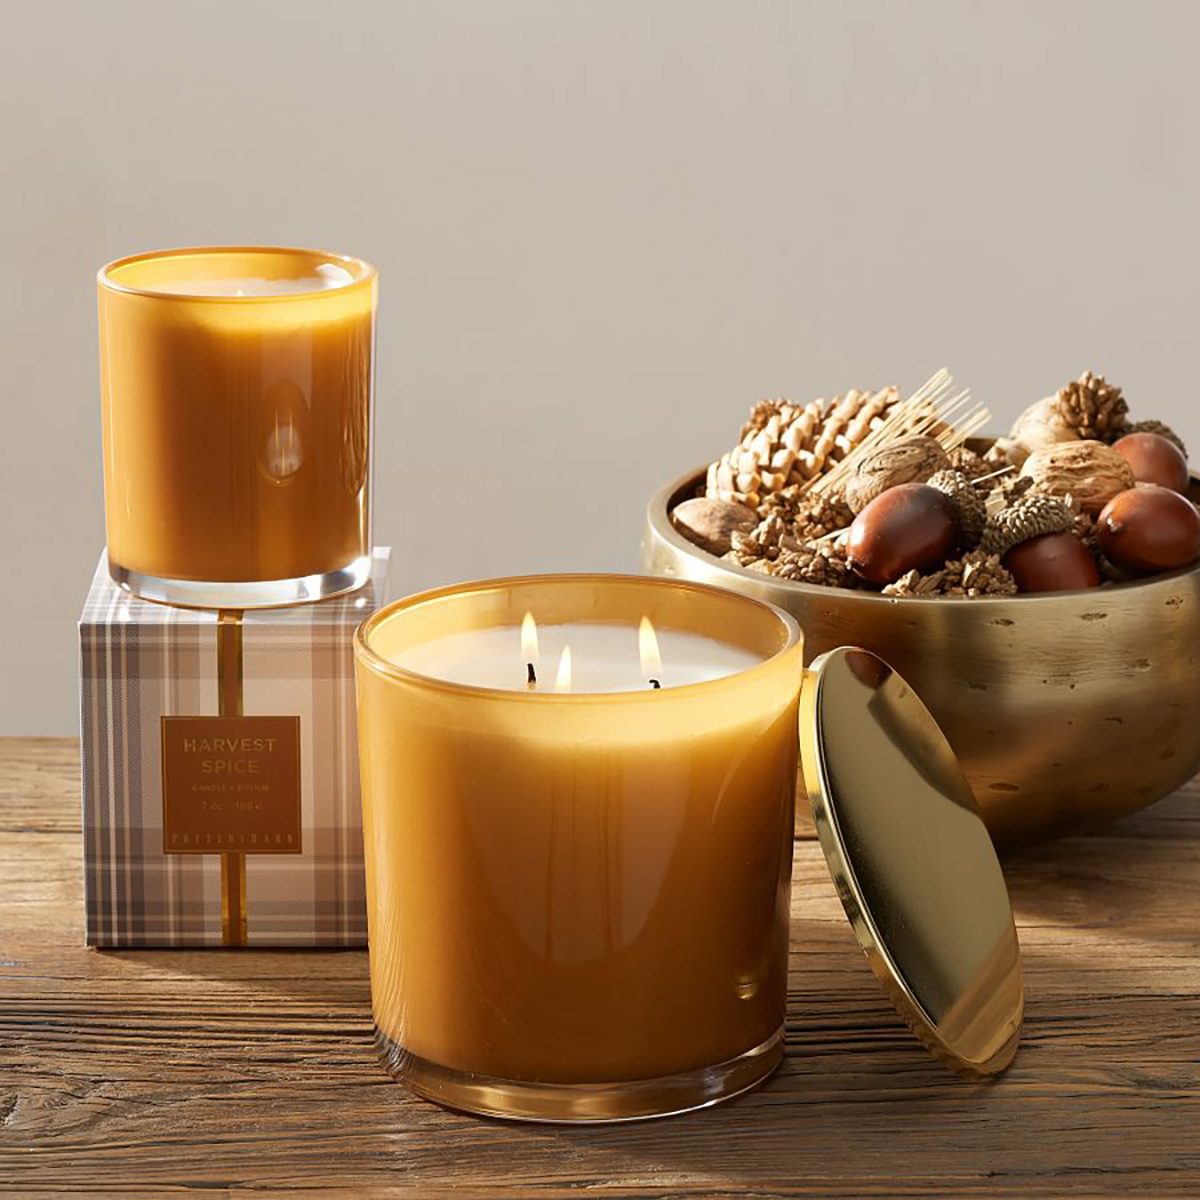 17 of the Best Fall Candles to Light in 2021